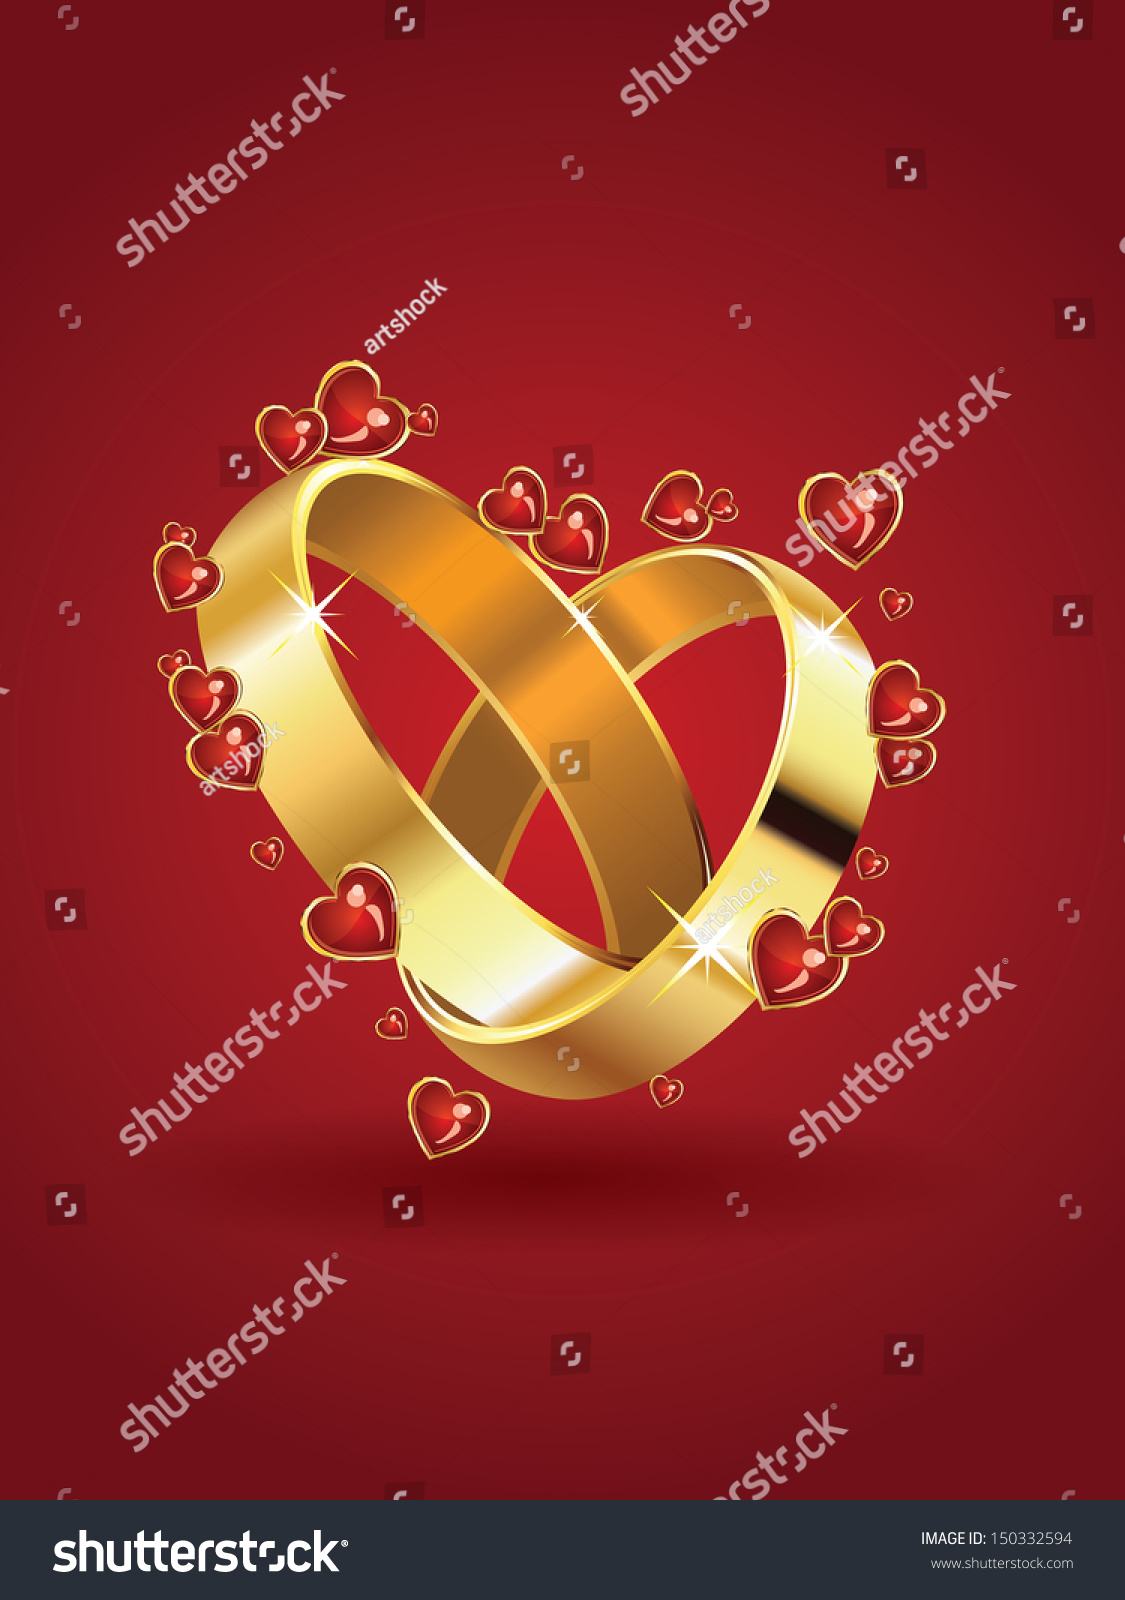 Two Wedding Rings In Heart Shape And Red Hearts Background. Stock ...